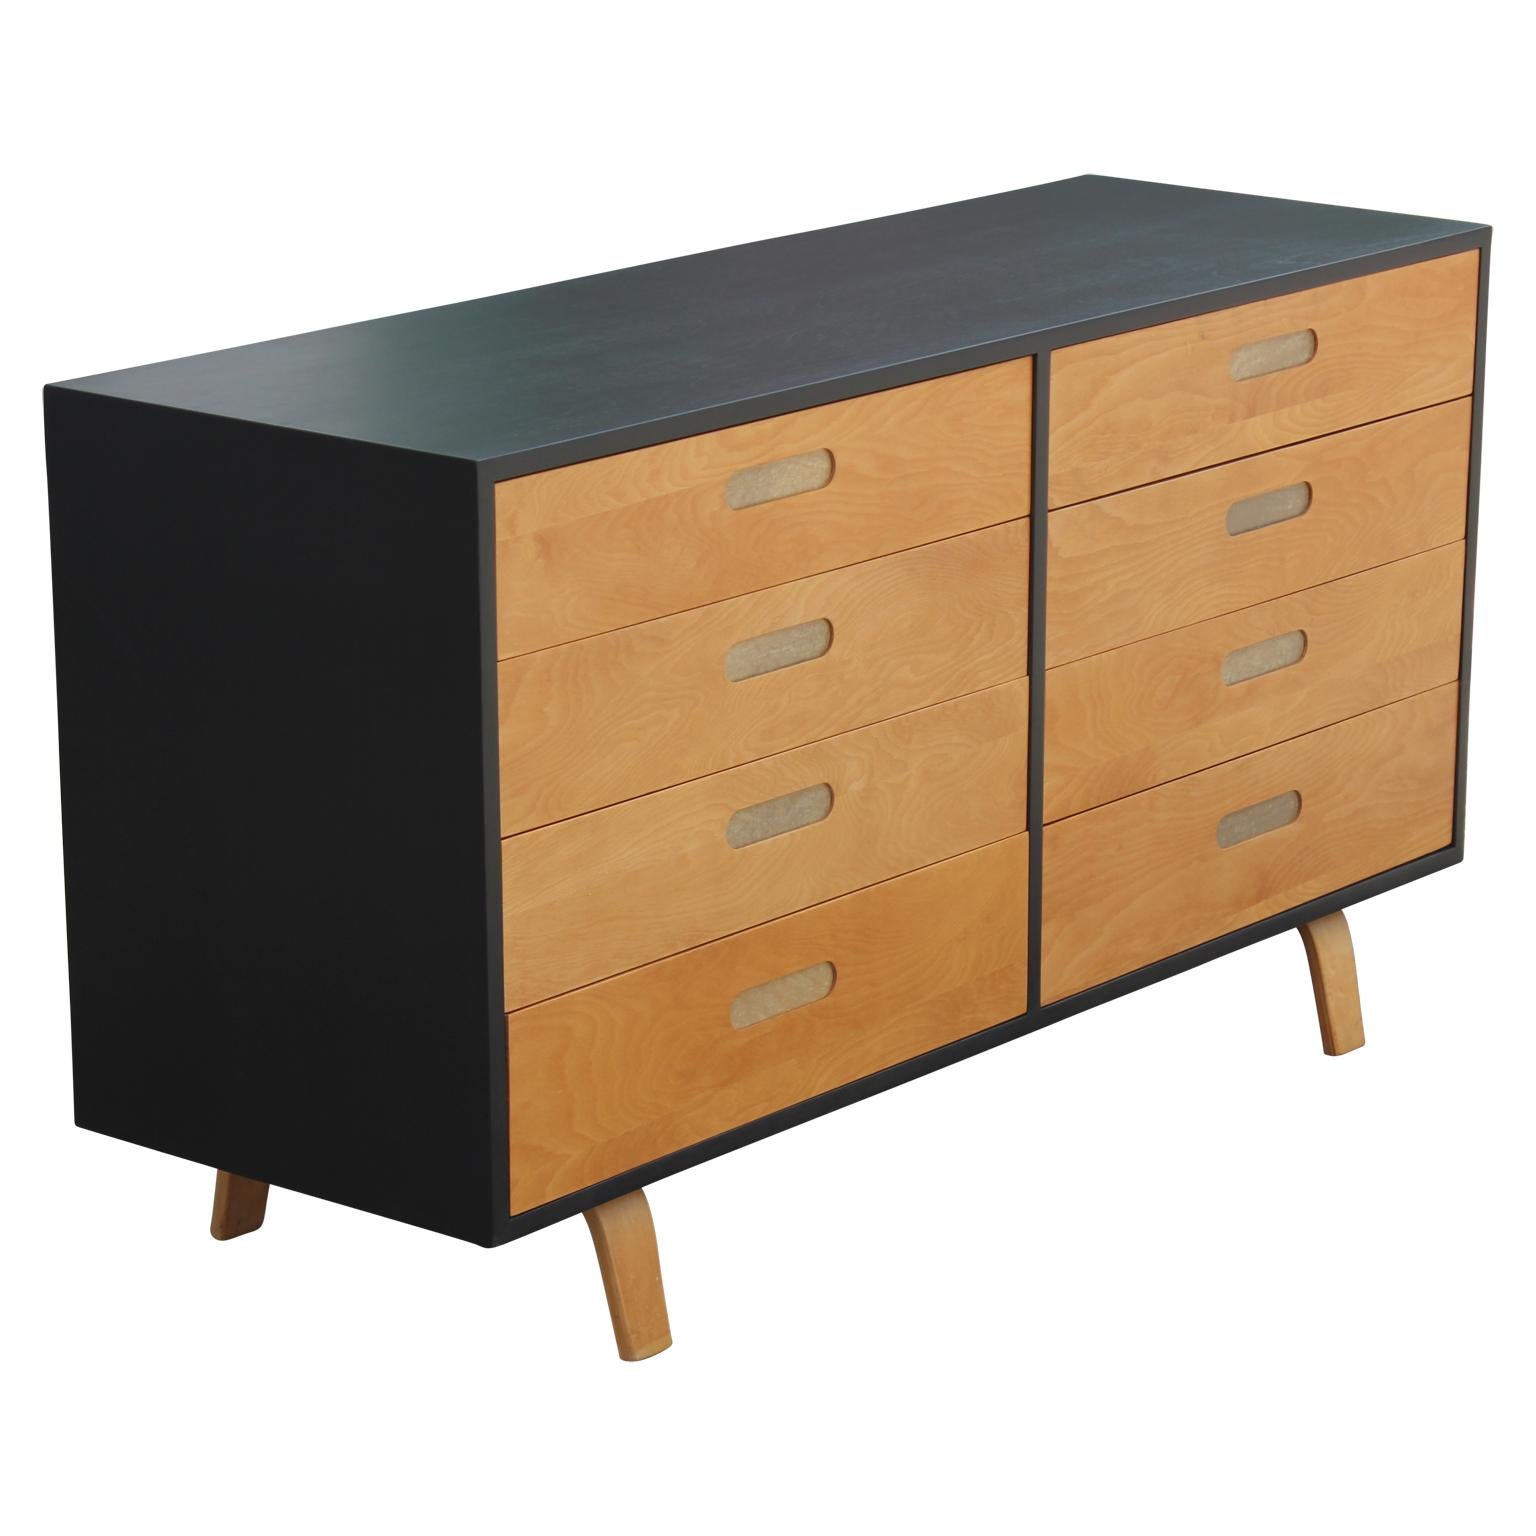 North American Modern Clifford Pascoe Two-Tone Birch Eight-Drawer Dresser with Recessed Pulls